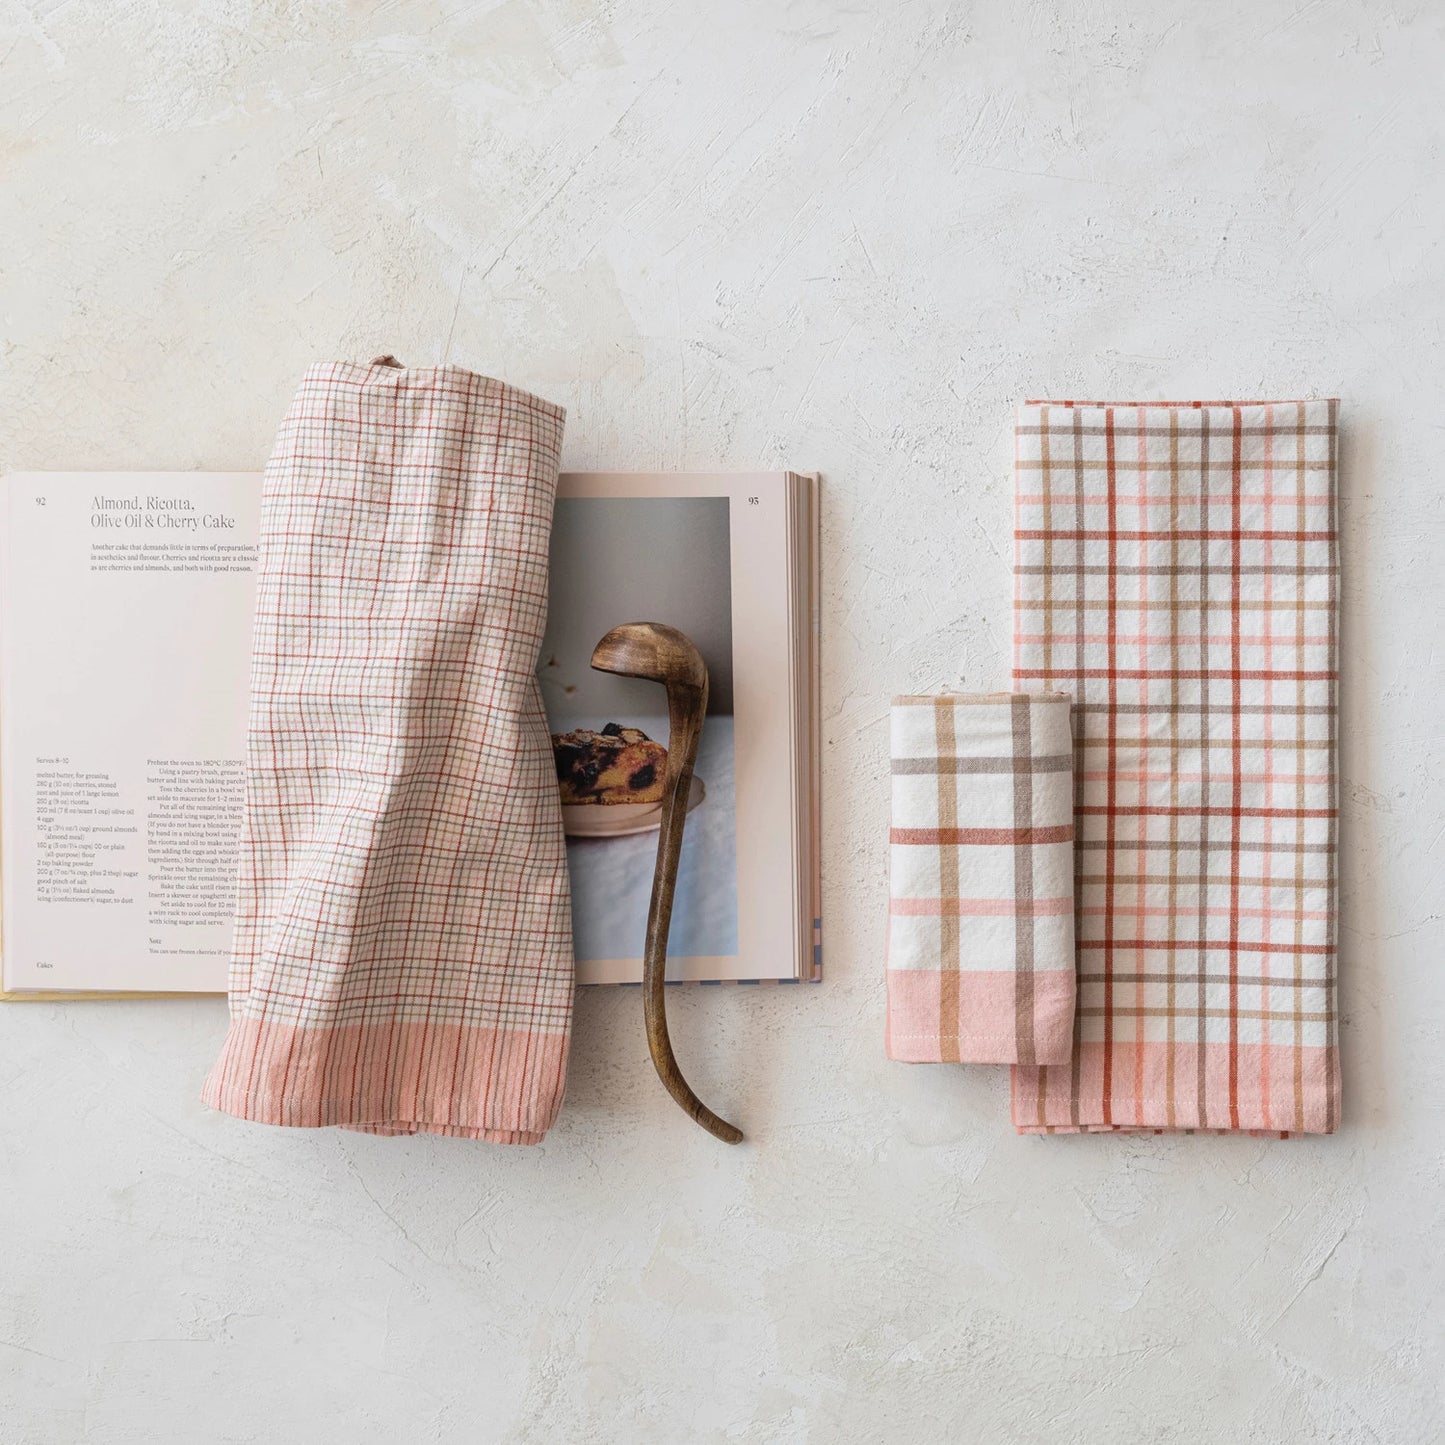 3 assorted plaid dishtowels folded and arranged on a table with an open cookbook and wooden ladle.